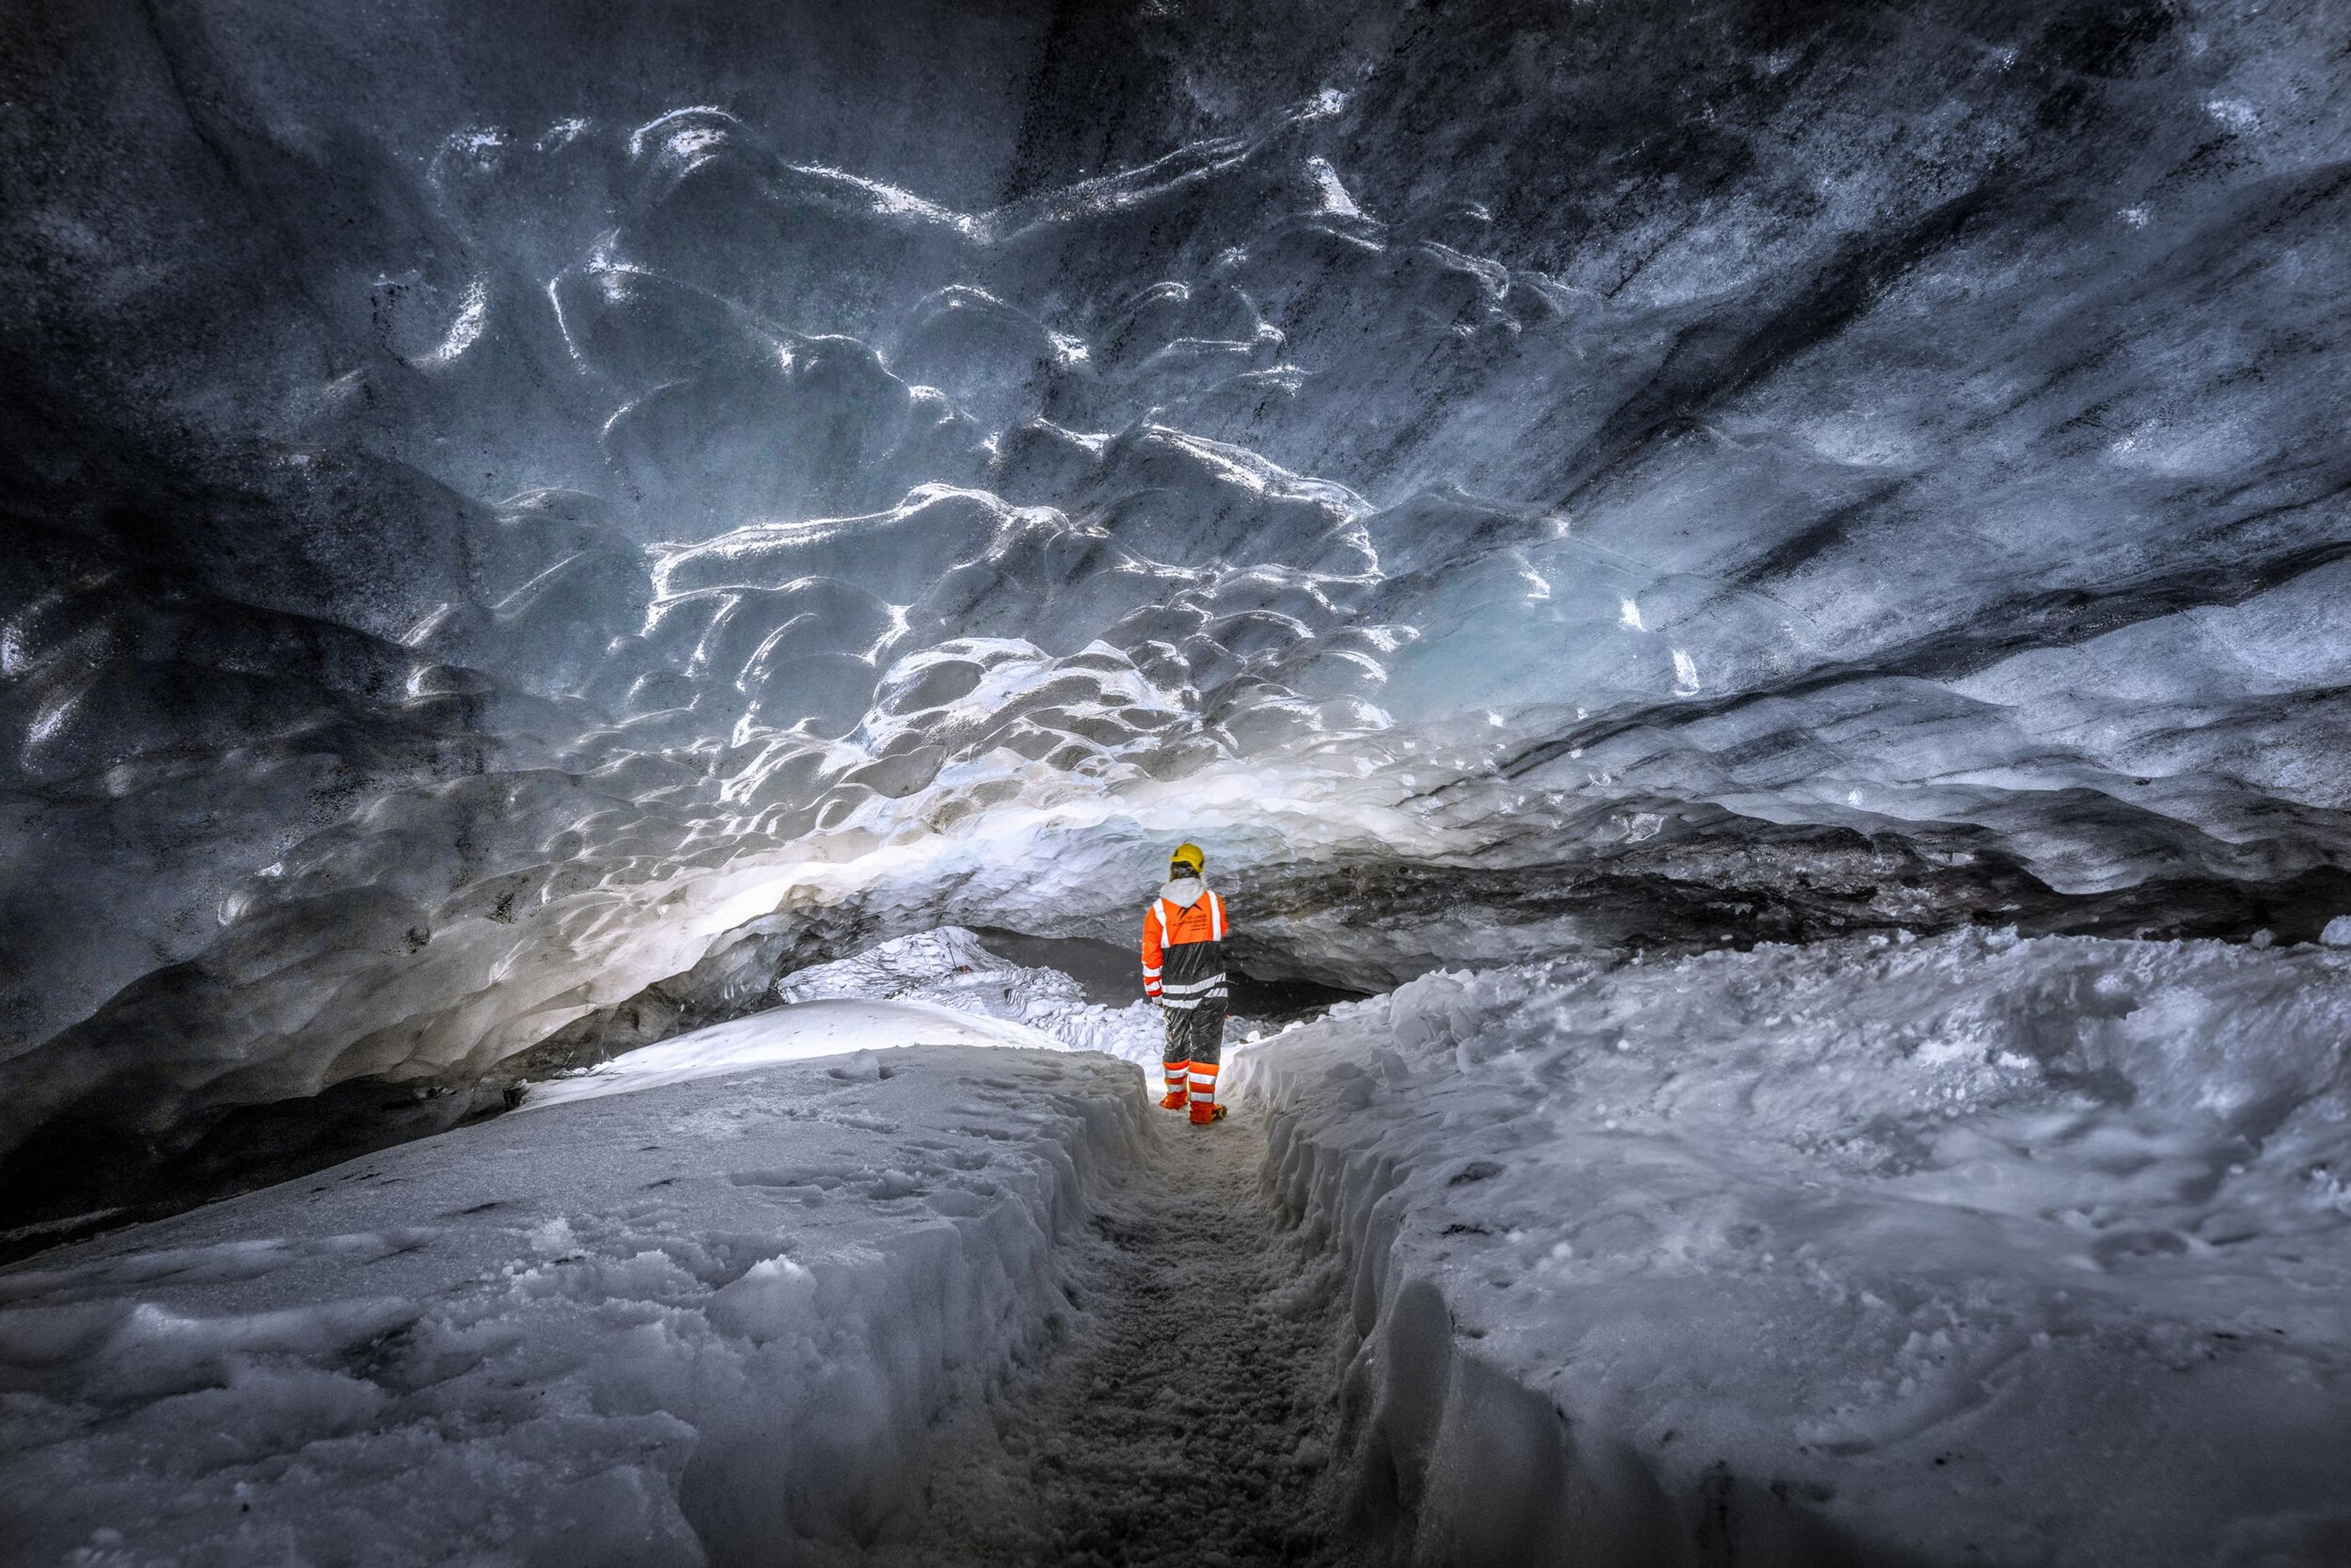 Explorer in orange and black suit pointing at the illuminated ice ceiling inside Askur ice cave, surrounded by snow.